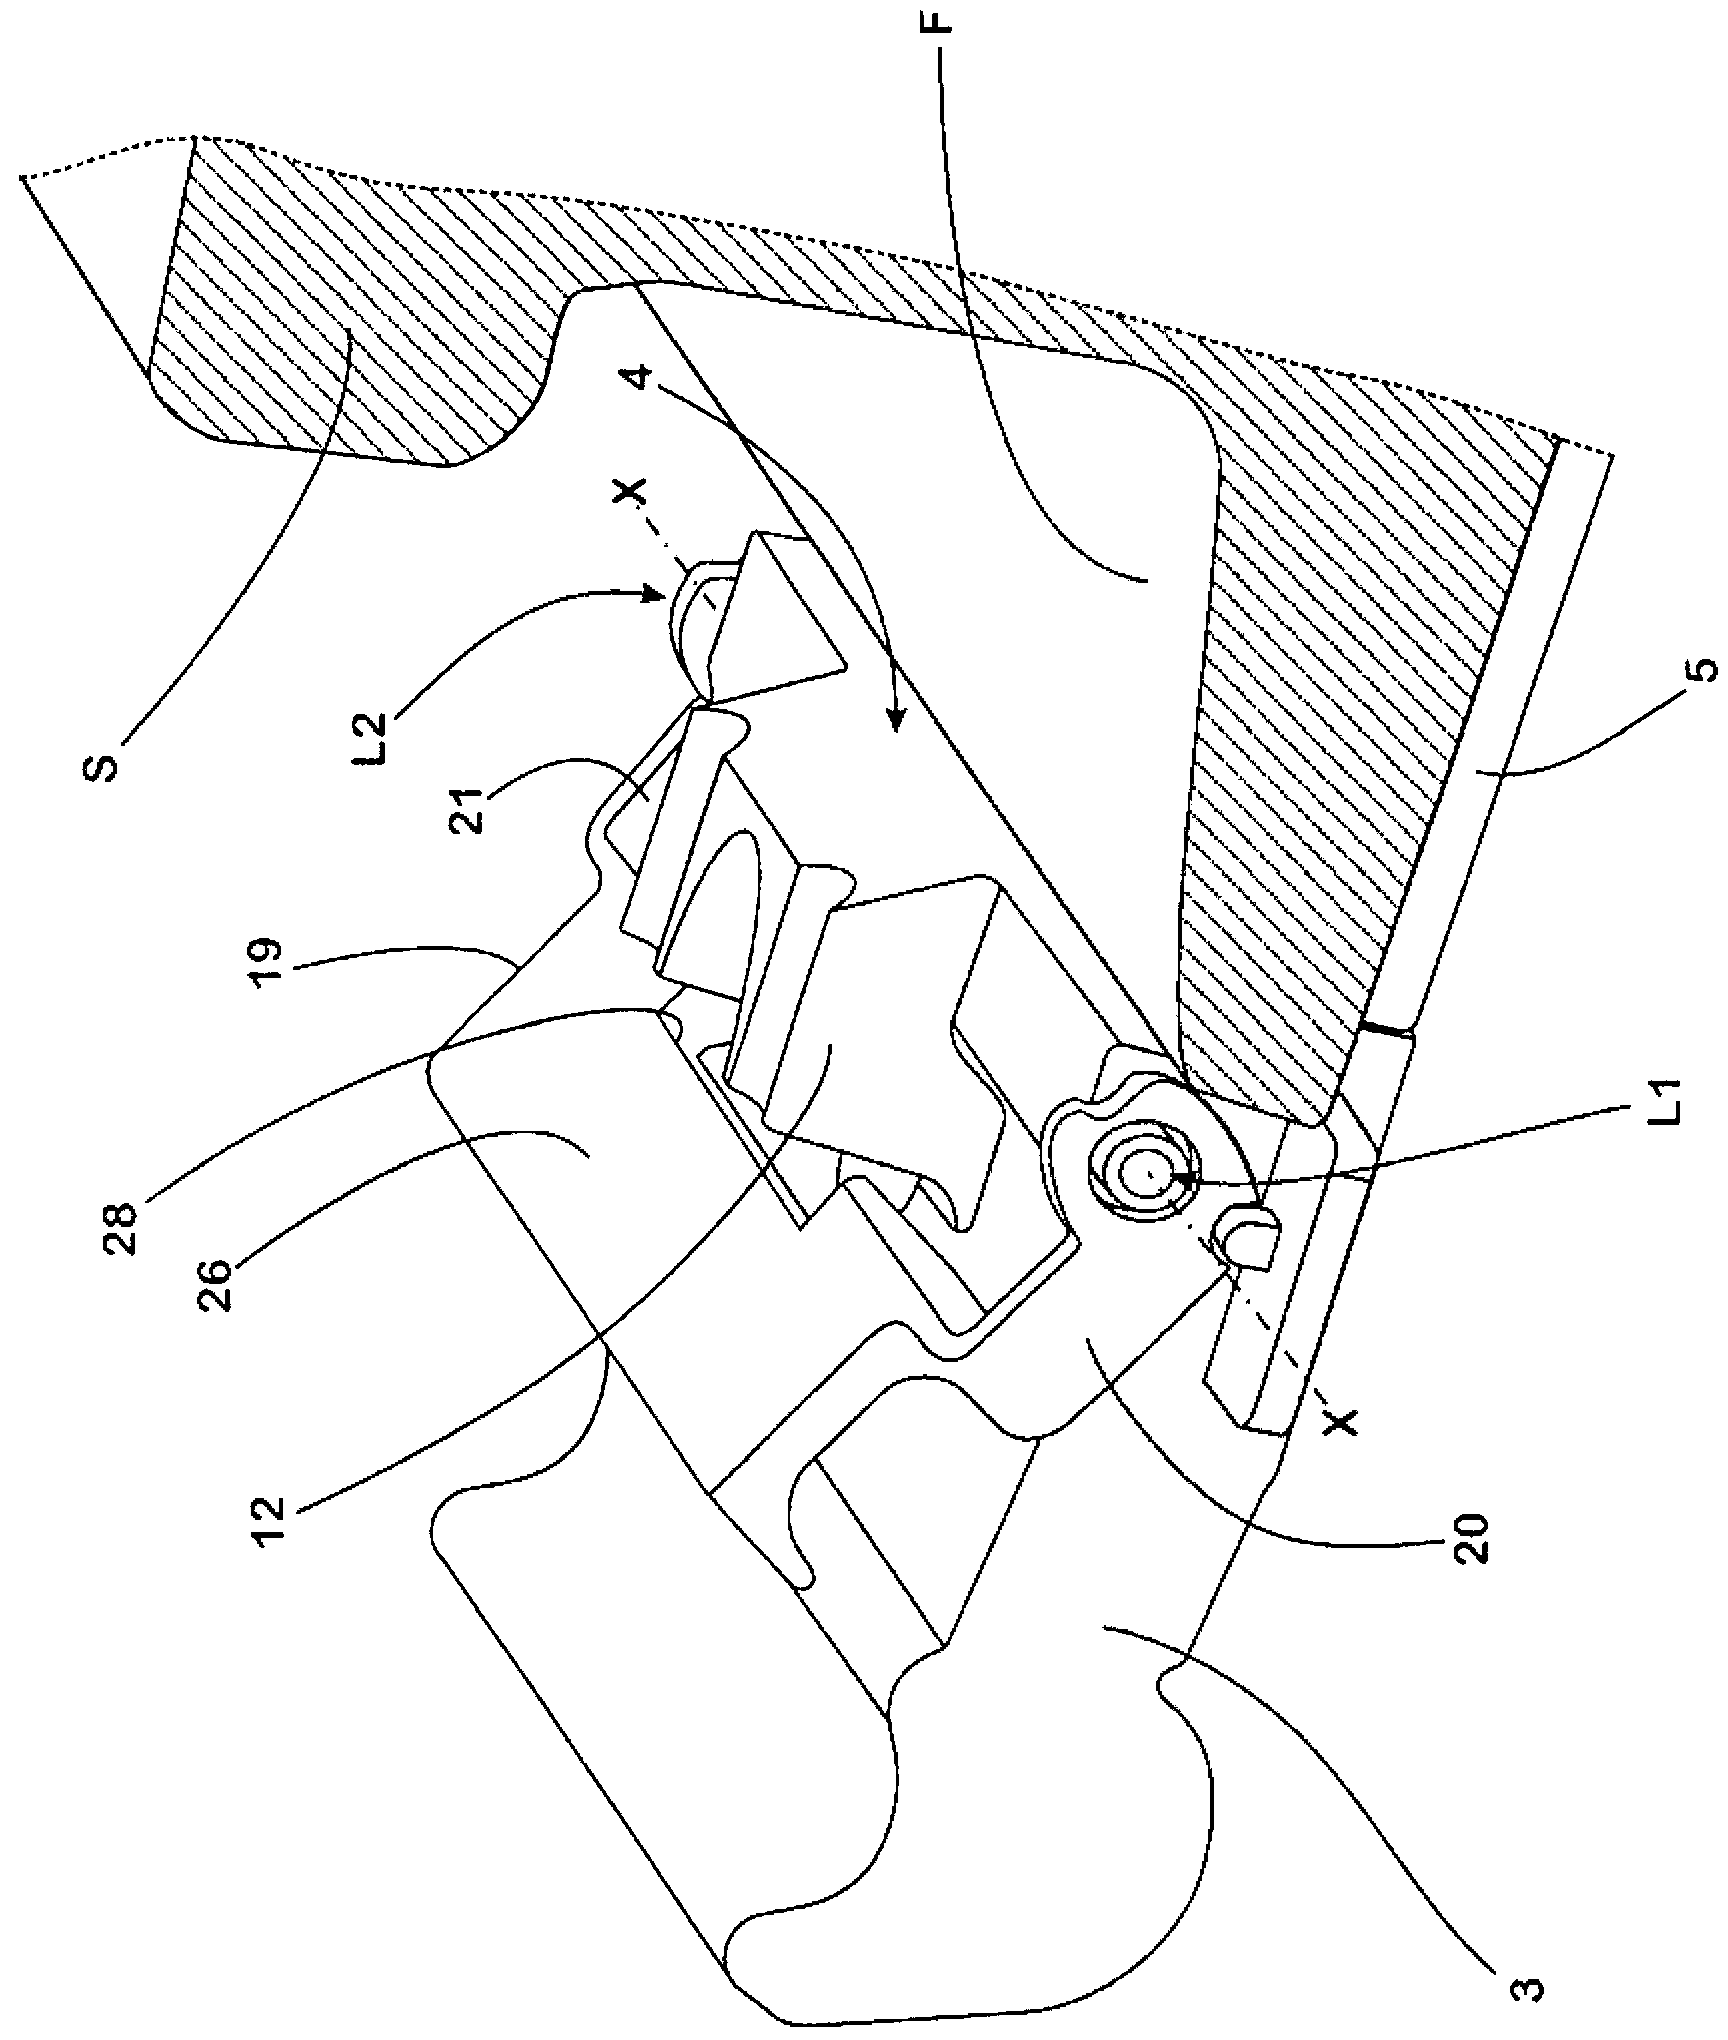 Guide plate for laterally guiding a rail, and system for securing a rail on a foundation